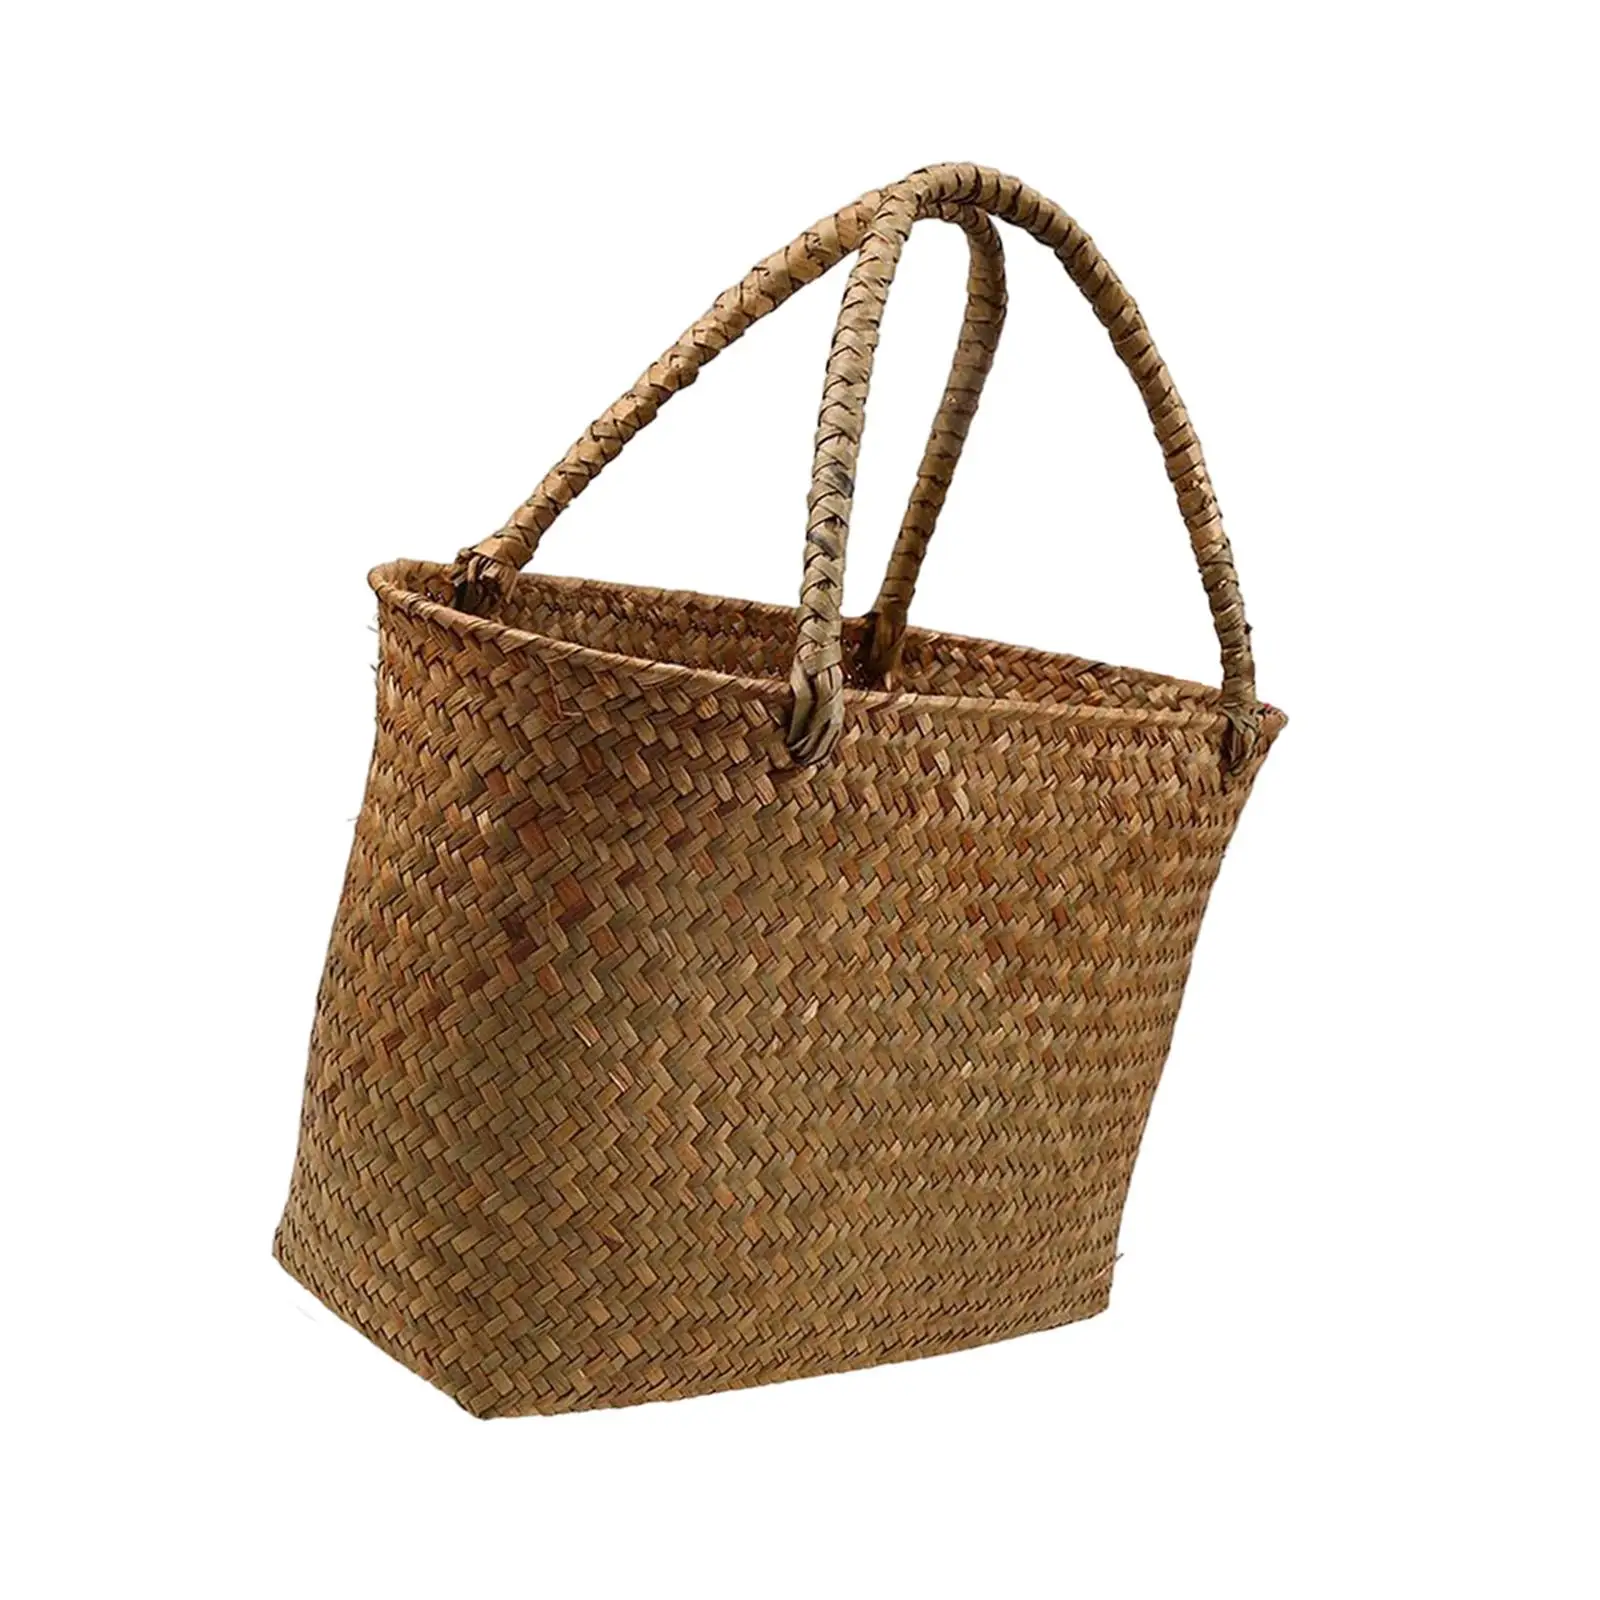 Rustic Rattan Woven Bag Holding Flowers Wicker Woven Basket for Beach Camping Fruits